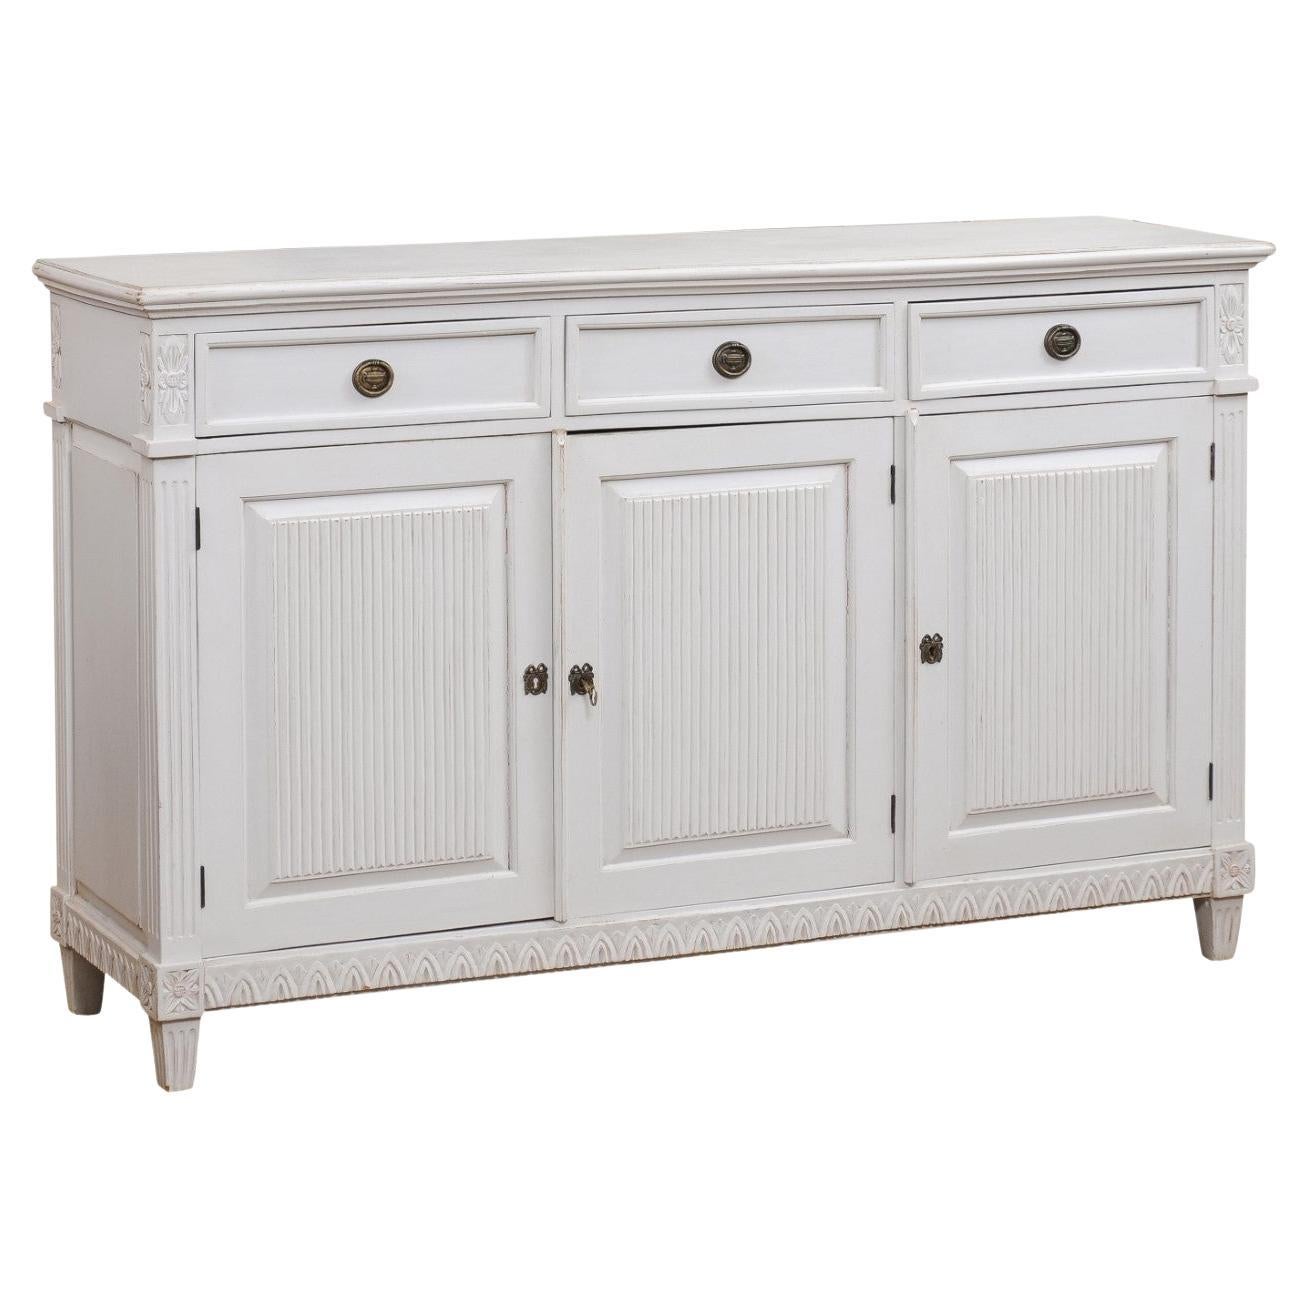 Swedish 1900s Gustavian Style Painted Sideboard with Three Drawers over Doors